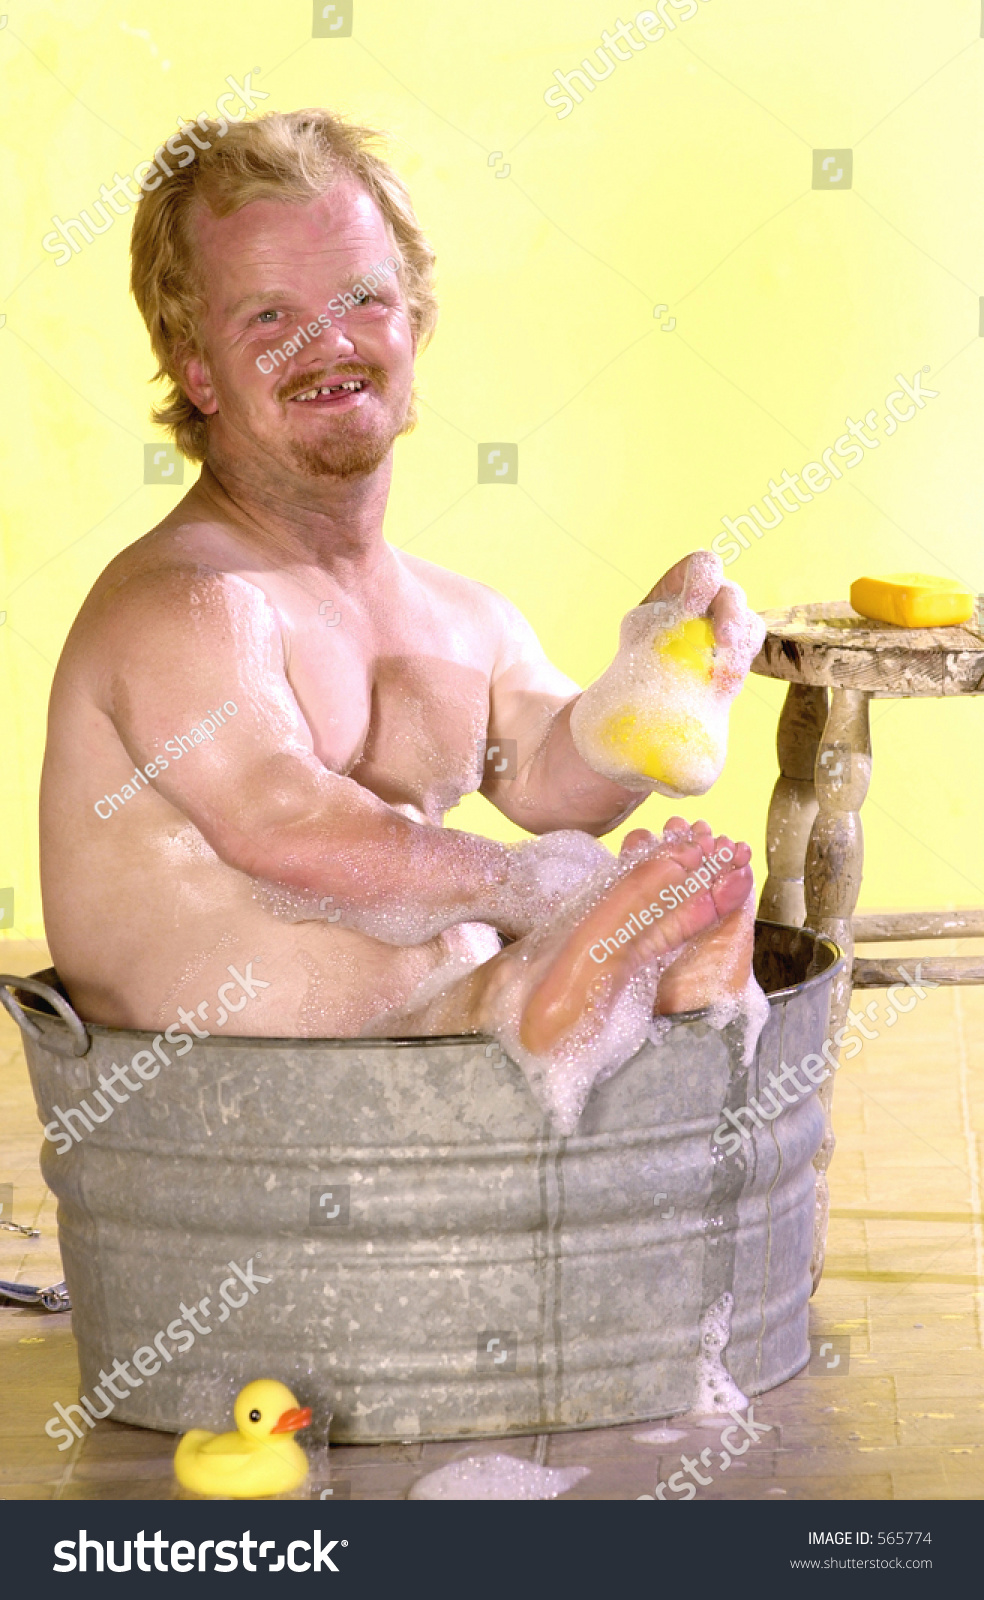 Tiny Man Takes A Bath In A Bucket Of Soapy Water With A Rubber Ducky